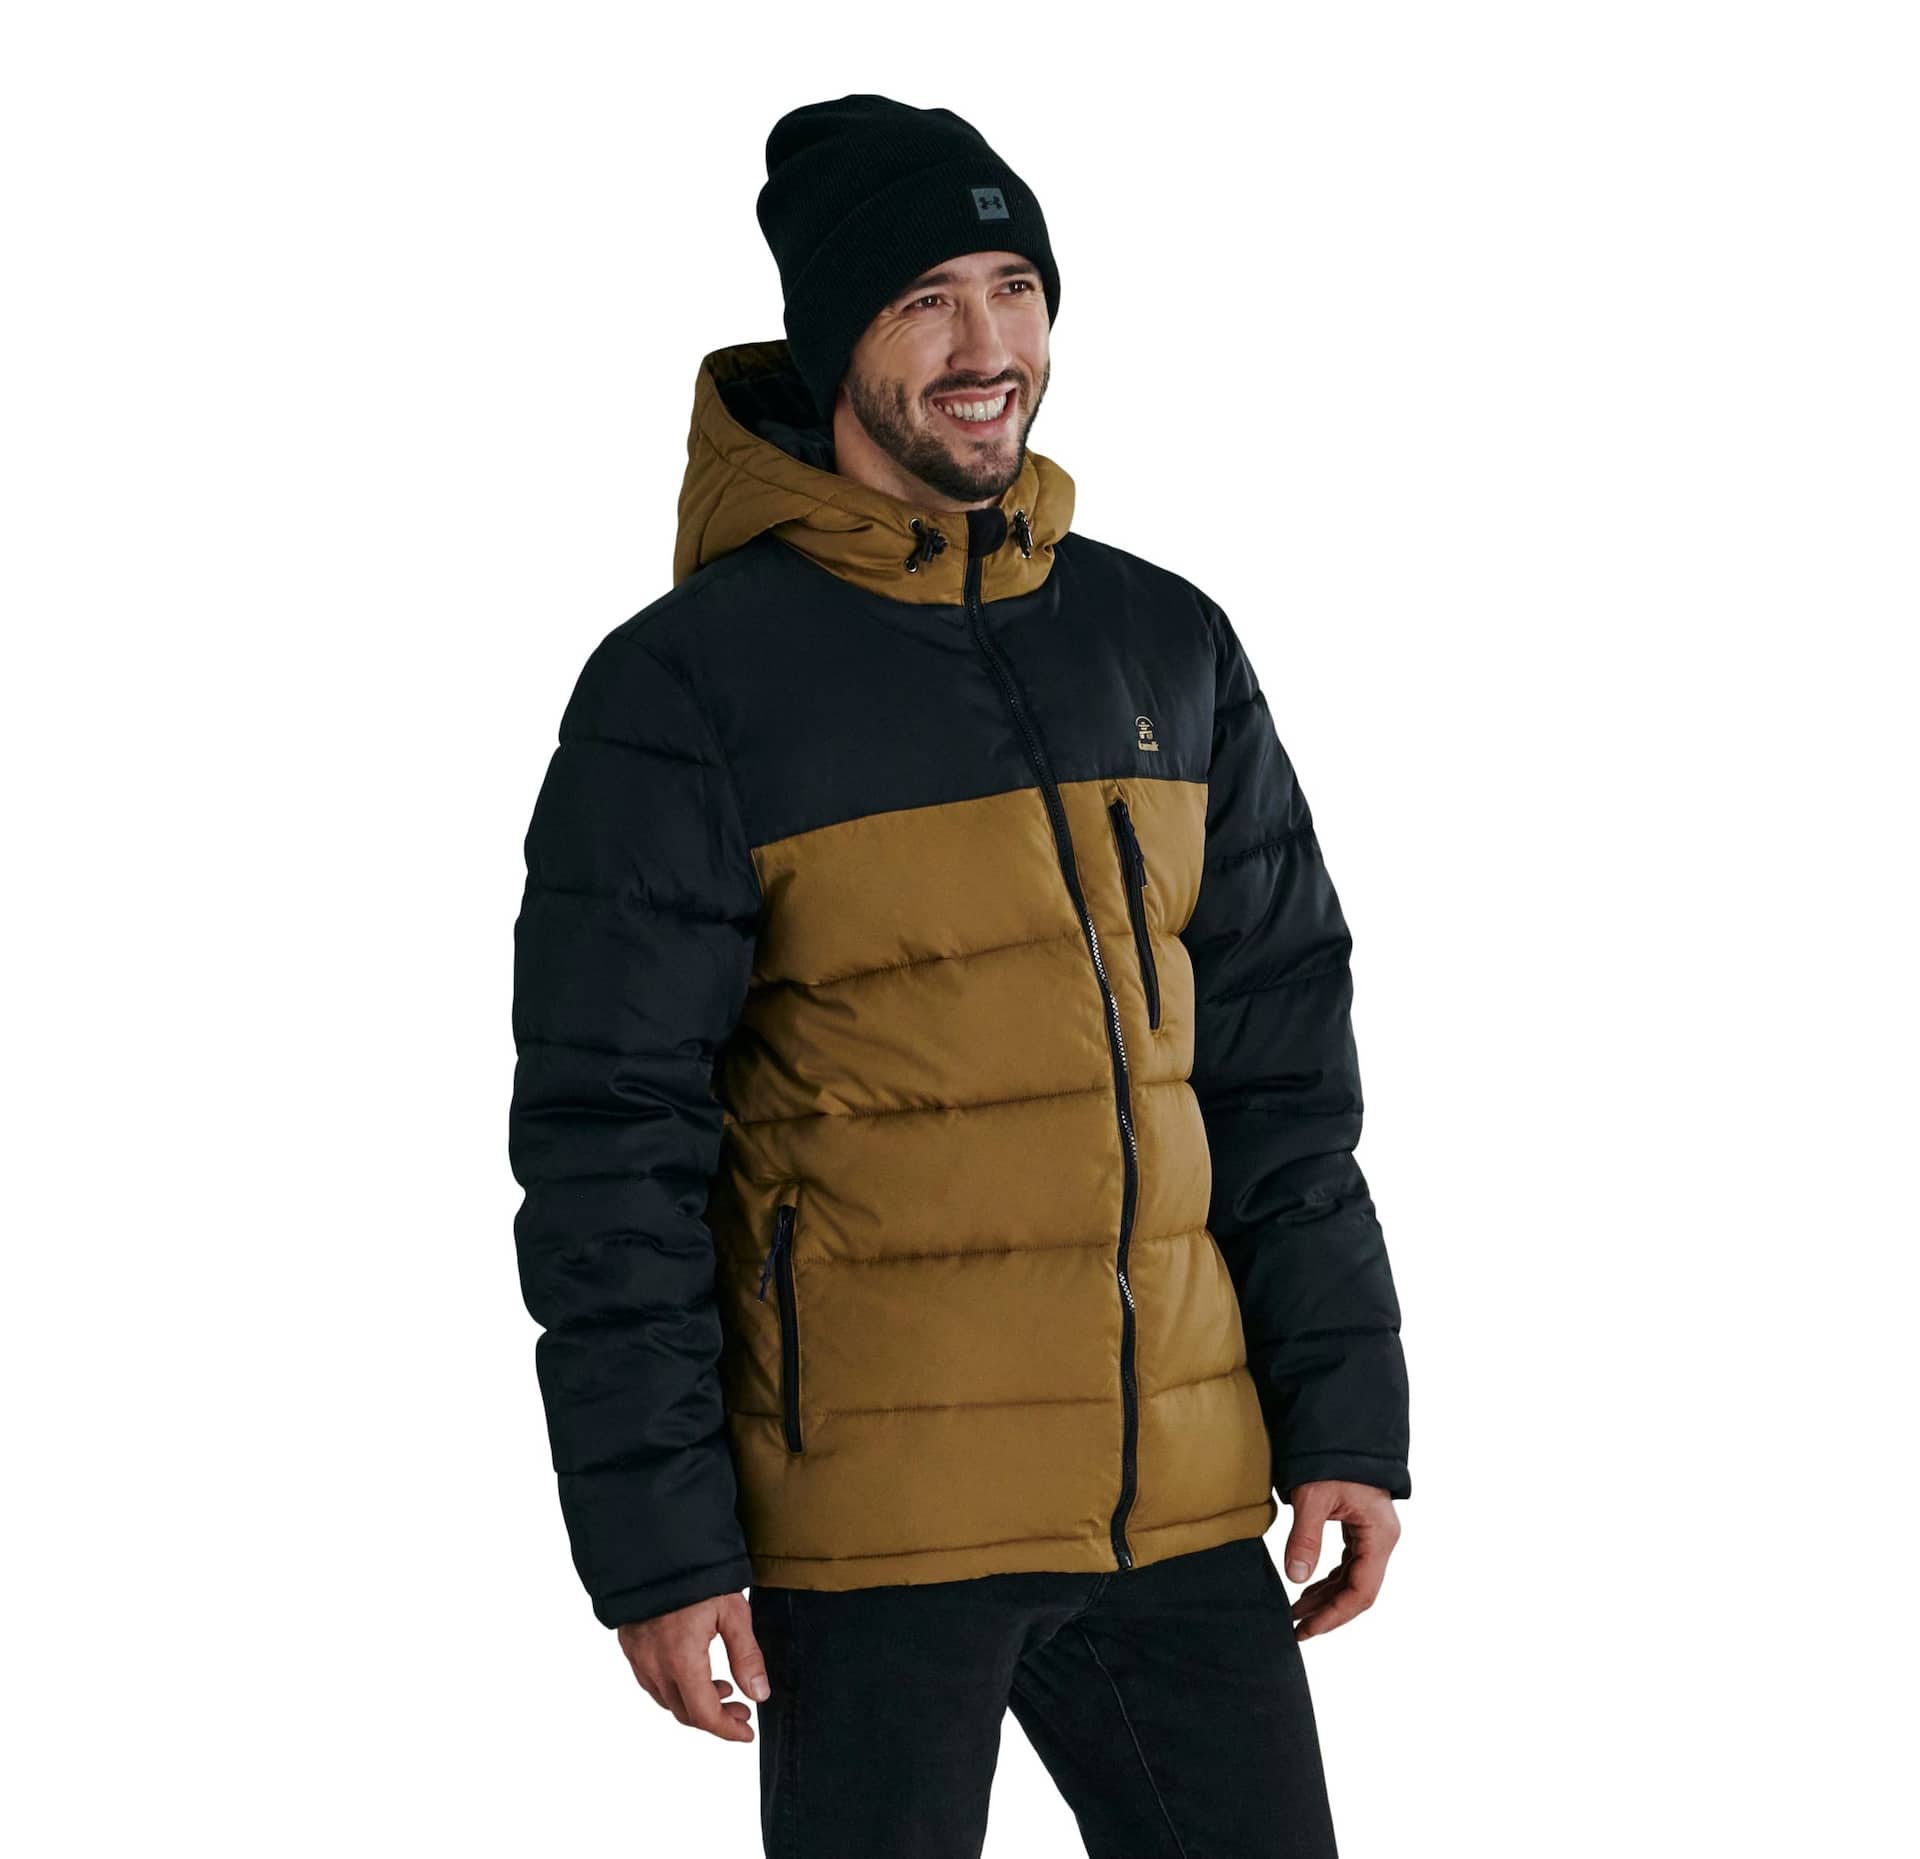 Archive Portillo Puffer Jacket – Marine Layer